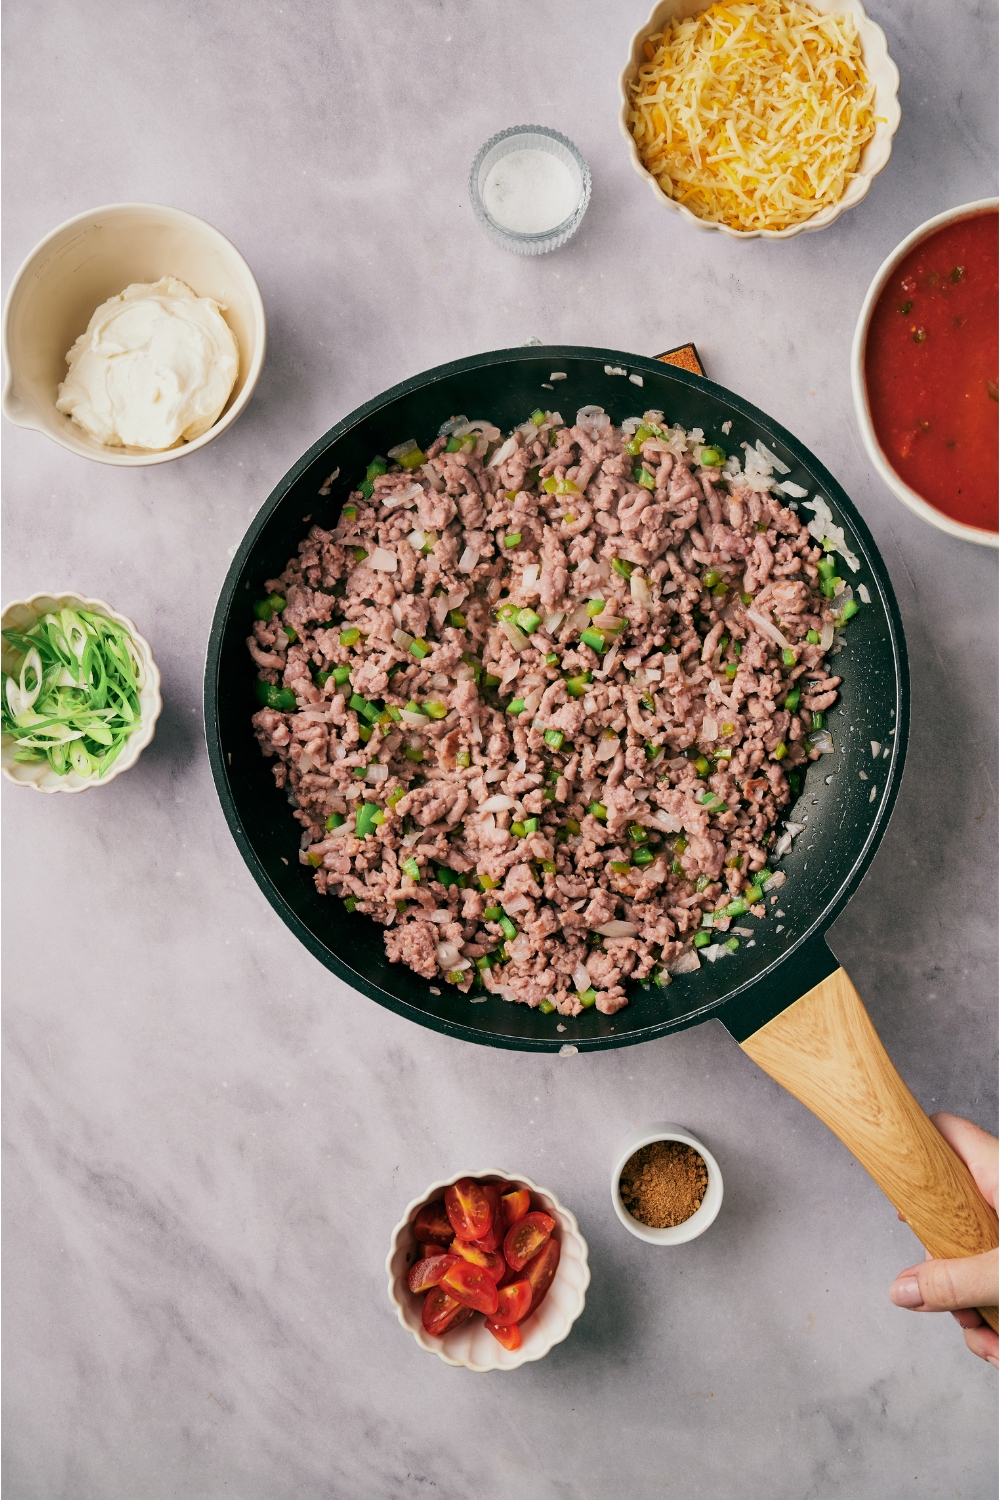 A skillet filled with cooked ground beef, diced onion, and diced green peppers. The skillet is surrounded by an assortment of ingredients.